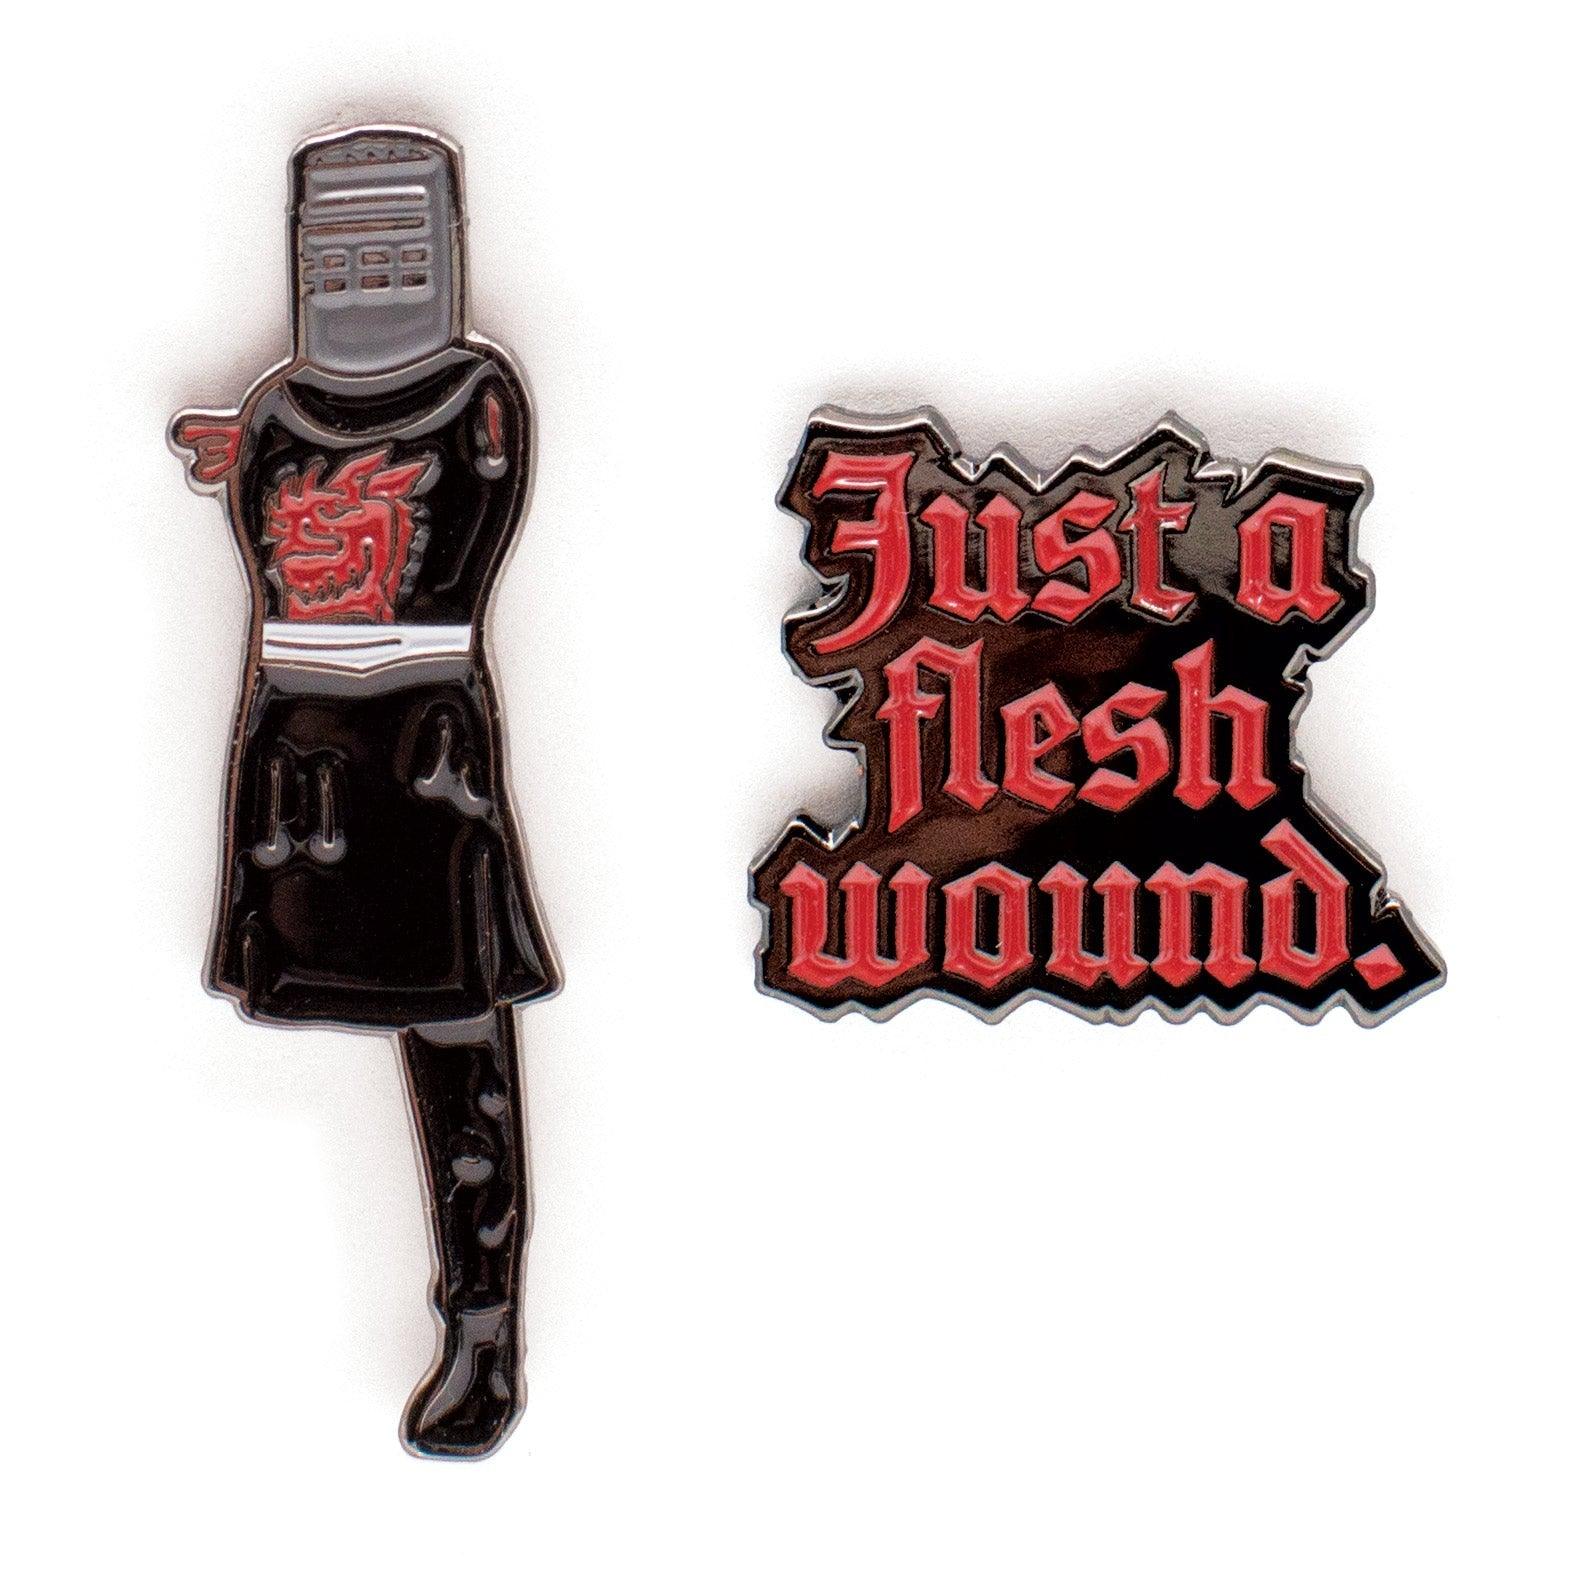 Product photo of Monty Python Black Knight Enamel Pin Set, a novelty gift manufactured by The Unemployed Philosophers Guild.